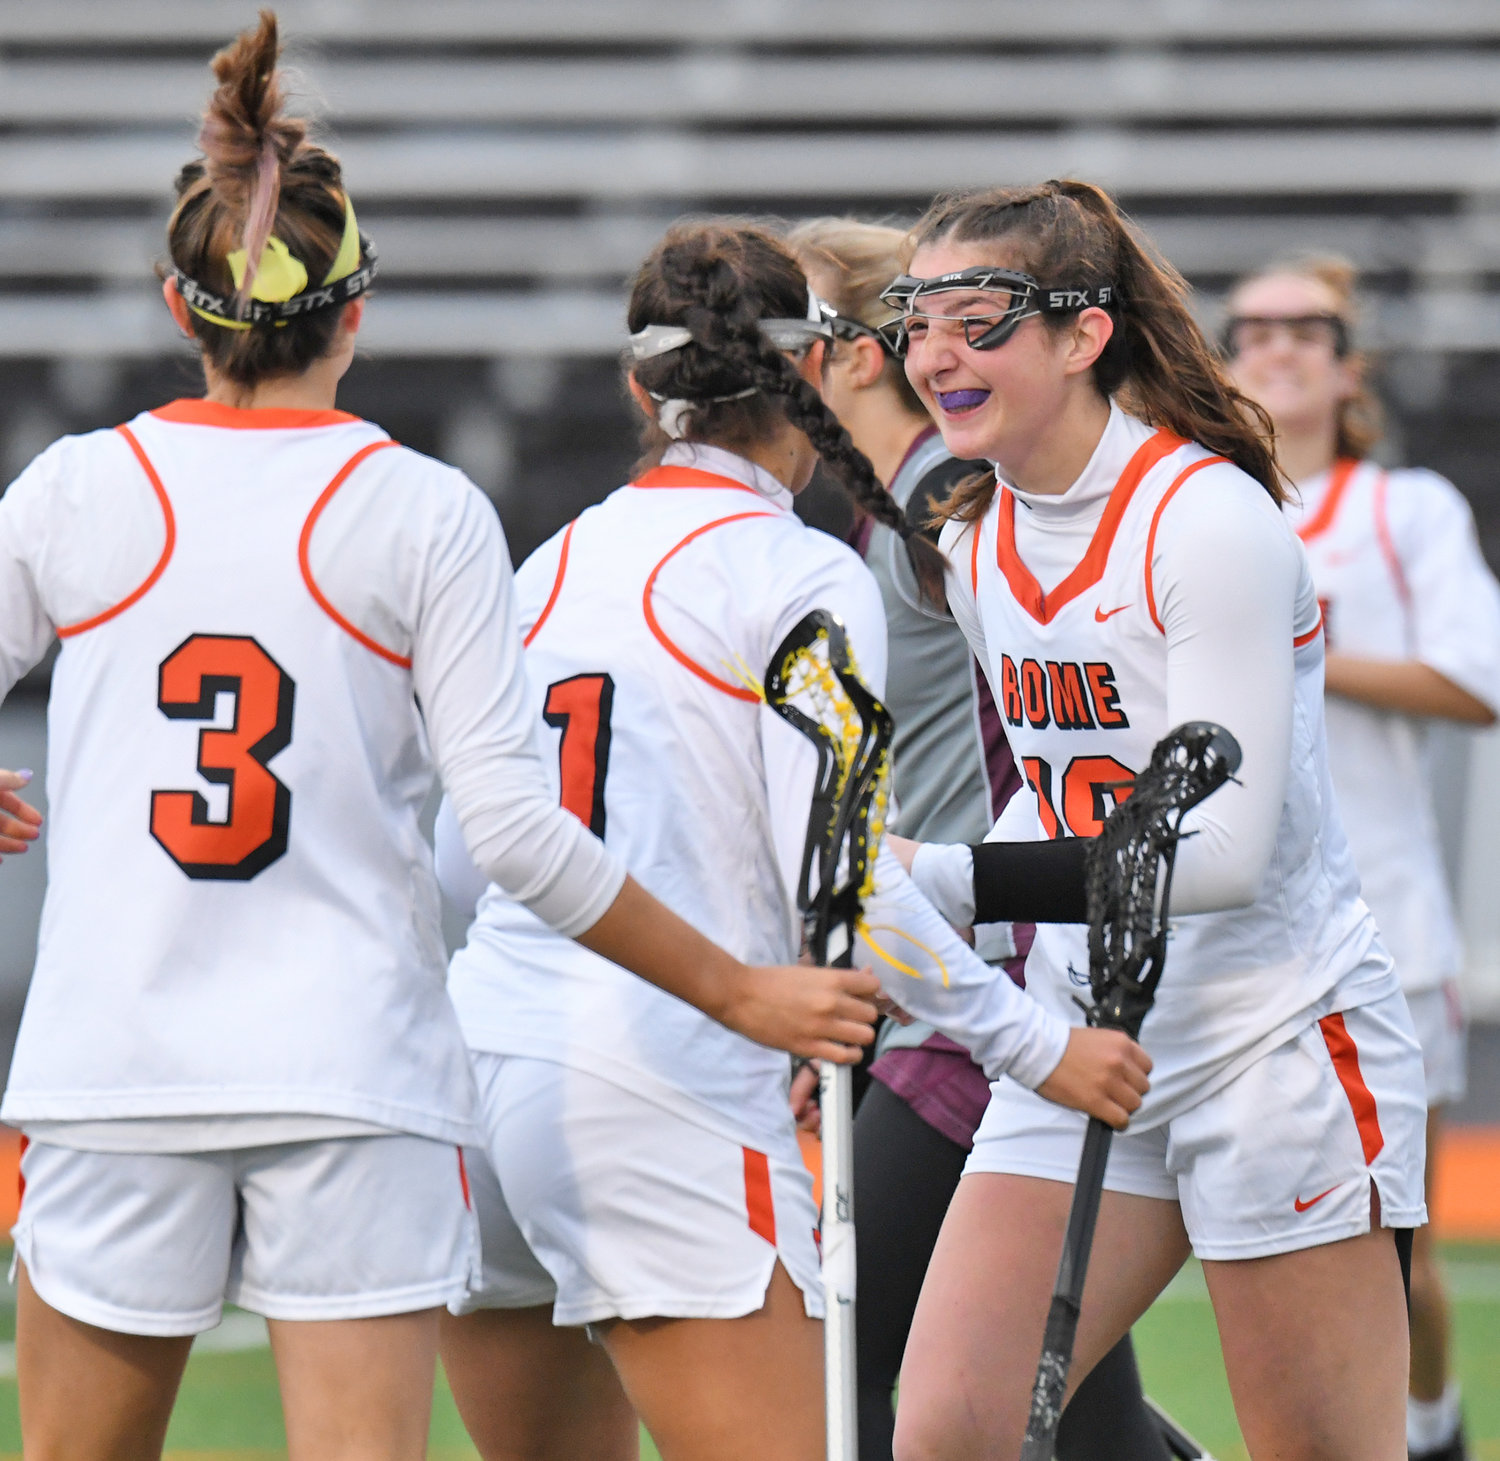 THREE THREATS — Rome Free Academy’s Alyssa Nardslico, right, celebrates her goal with teammate Danielle D’Aiuto (1) and Alexandra Tapia (3) Thursday at RFA Stadium. D’Aiuto had a hat trick and Tapia had two goals as RFA defeated Clinton in a Tri-Valley League game 13-7.